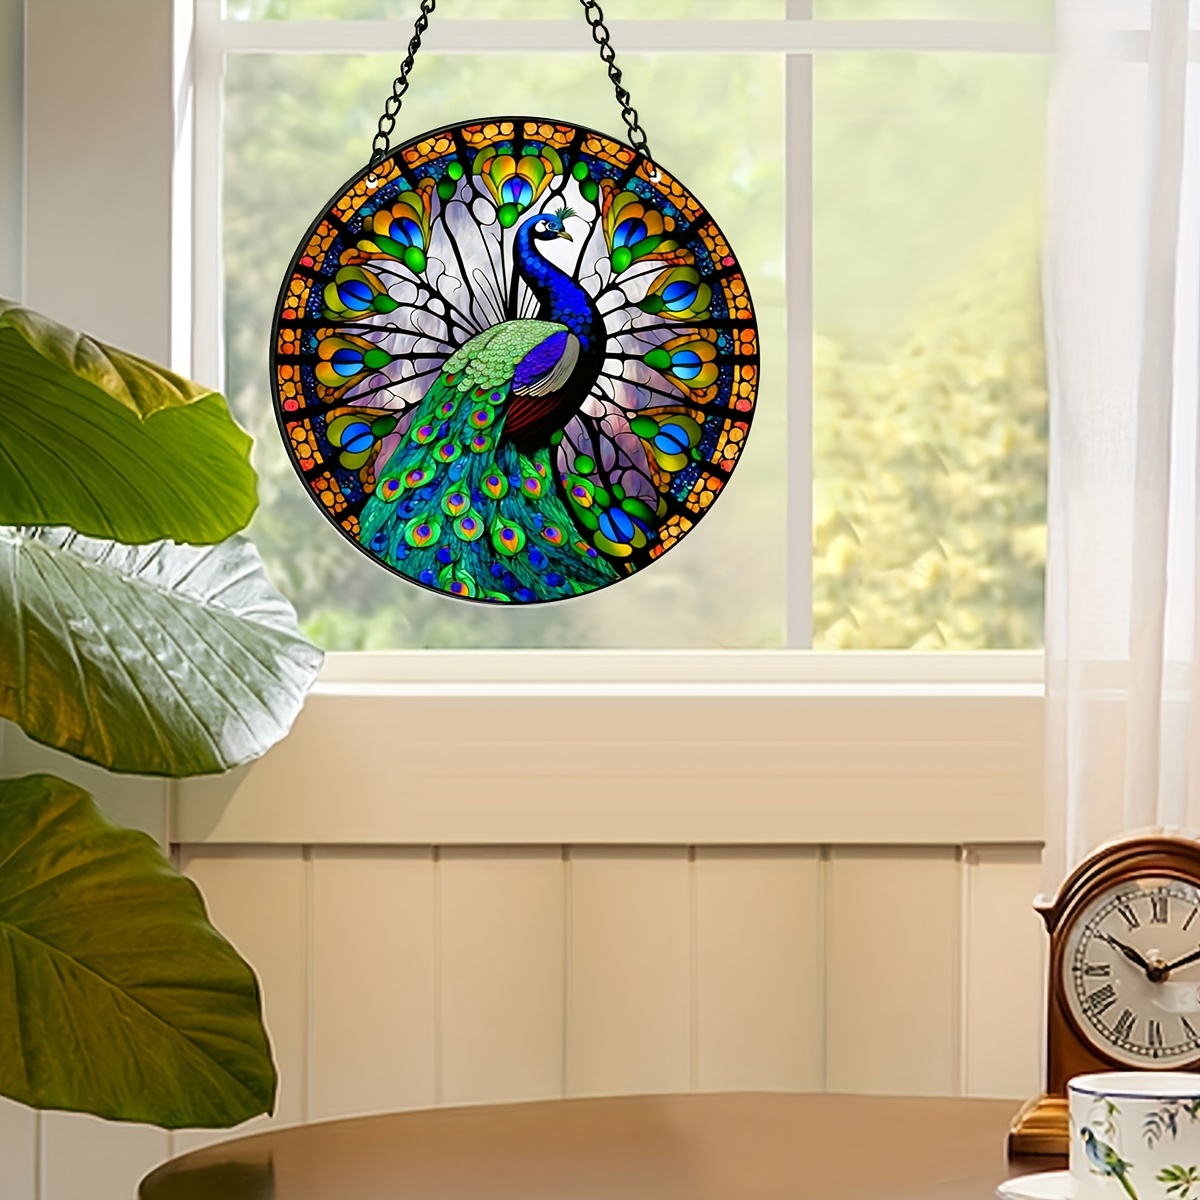 

1 Piece Peacock Suncatcher Stained Plastic Window Hanging For Office, Room, Kitchen Decoration For Peacock Lovers